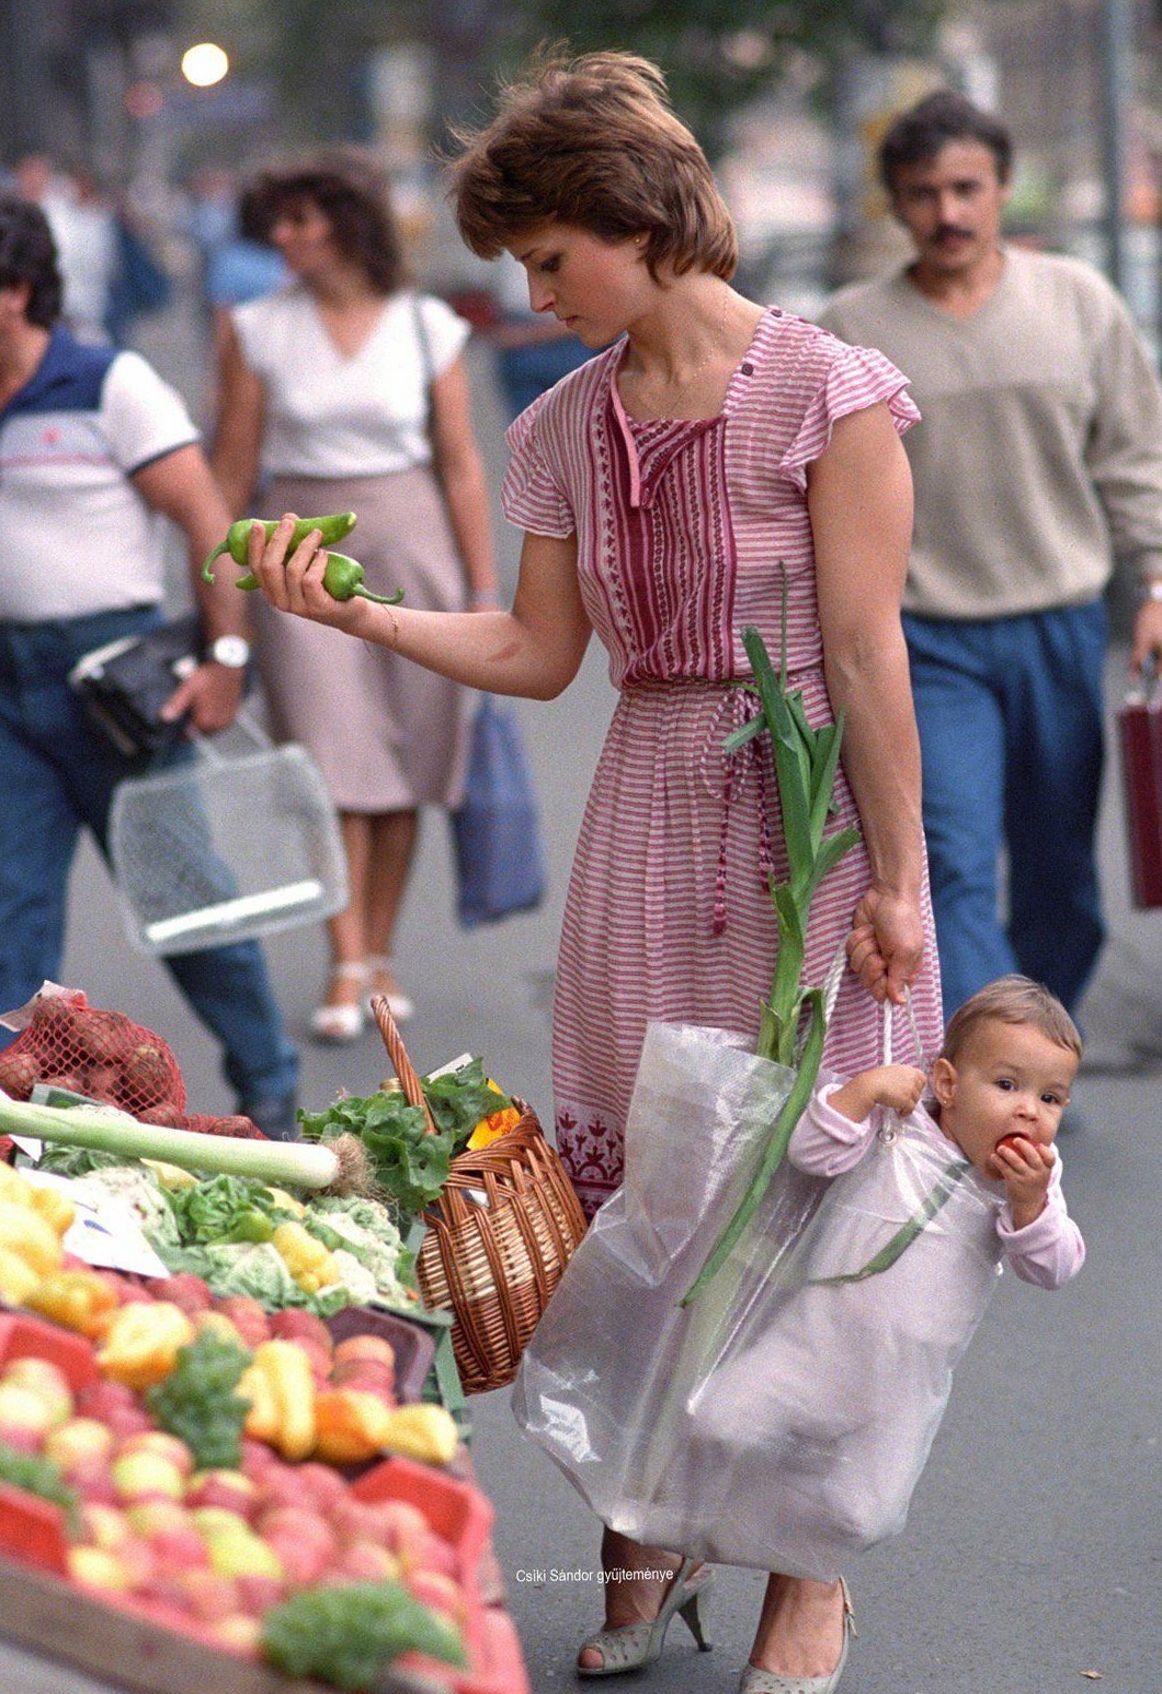 Princess Diana selects vegetables for the Queen's birthday dinner while William dangles, London, 1982